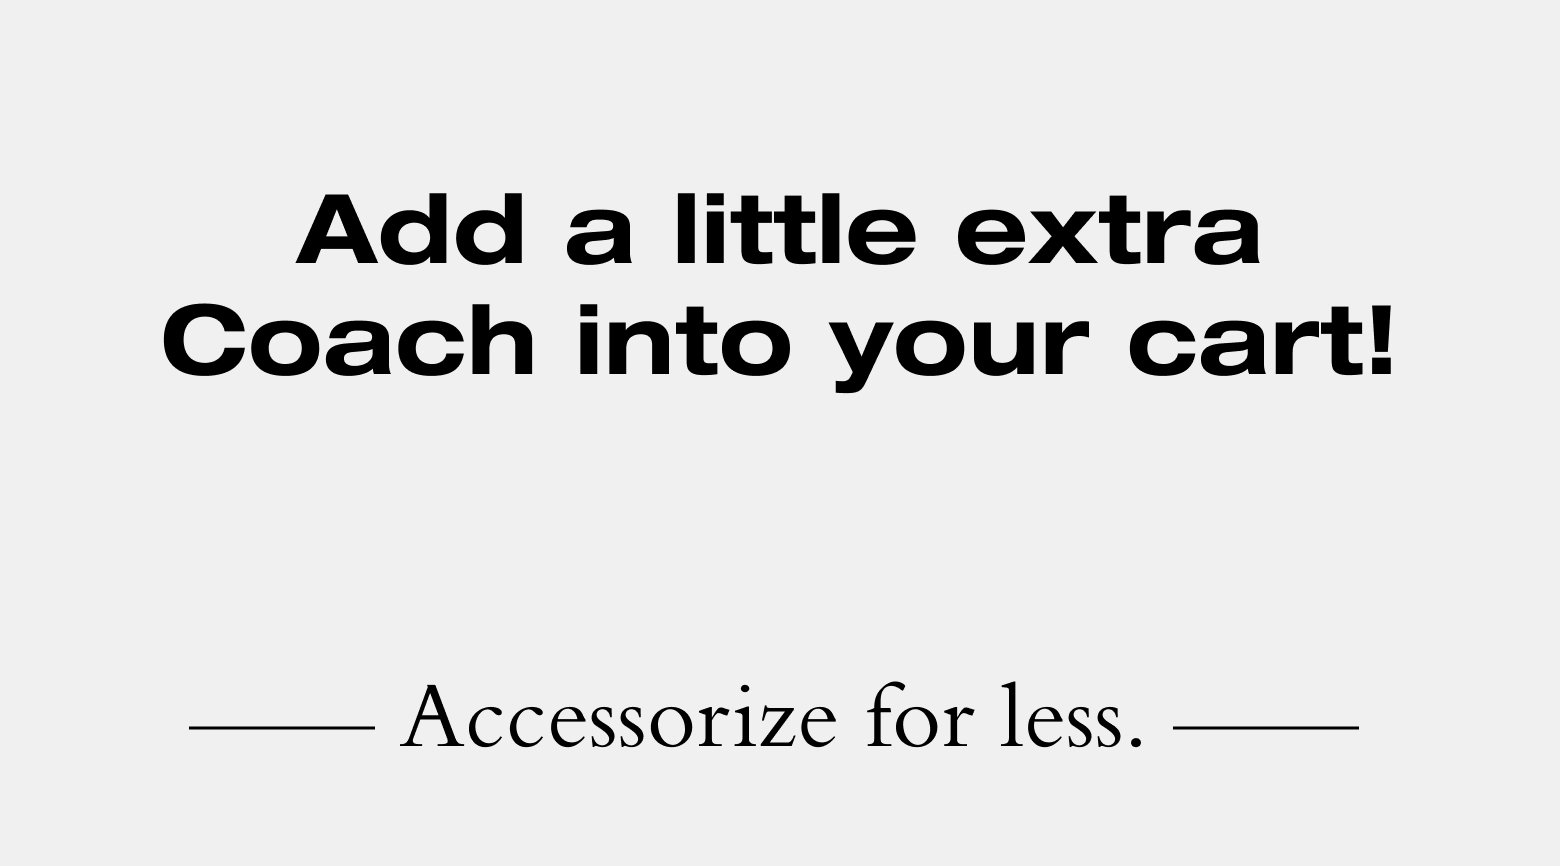 Add a little extra Coach into your cart! Accessorize for less.